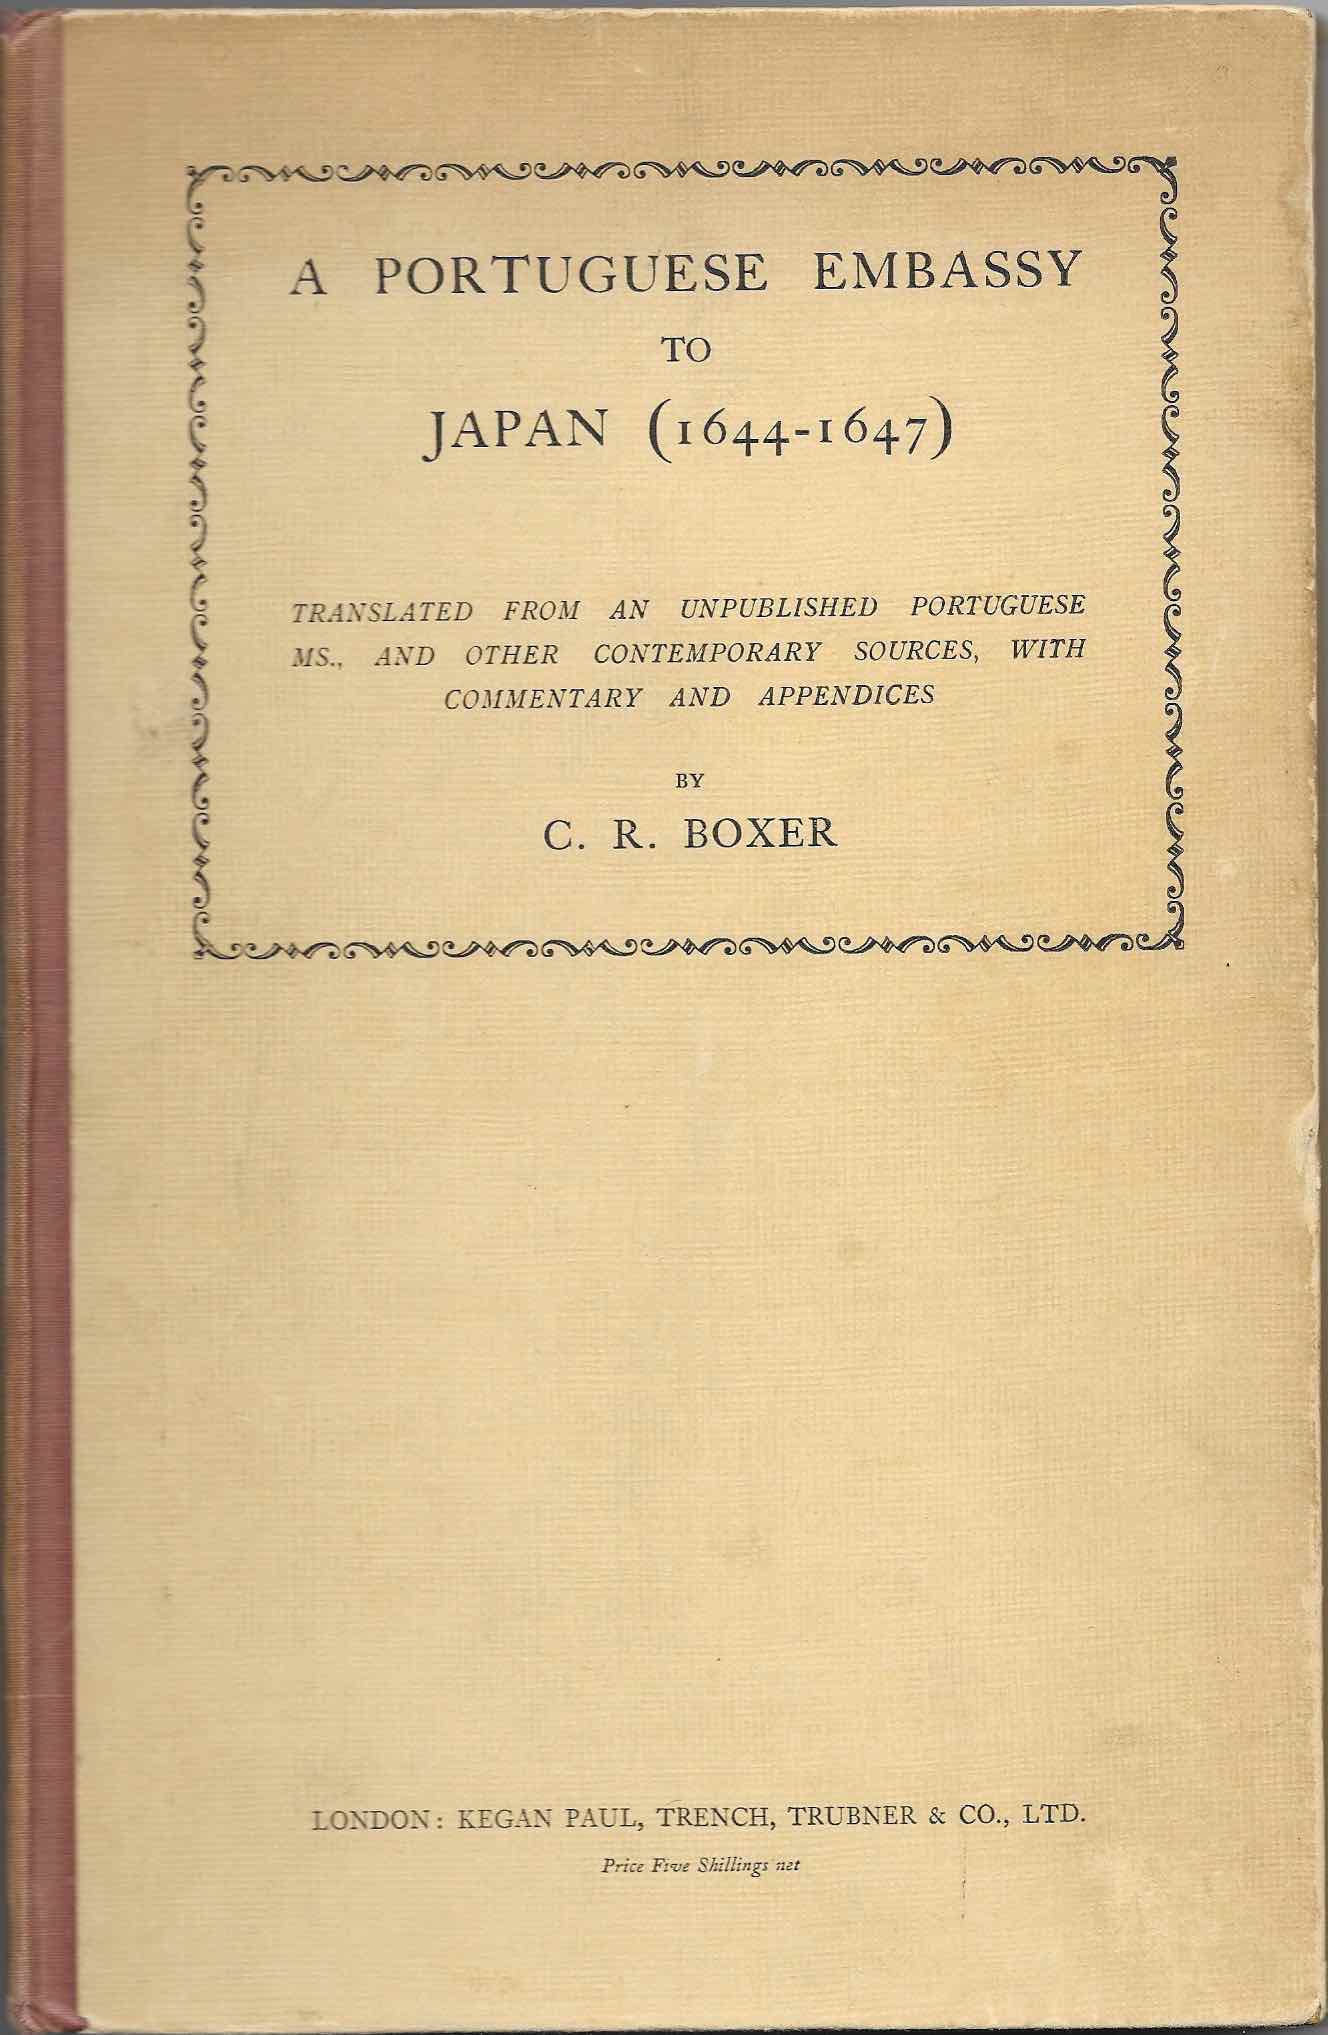 BOXER, CHARLES RALPH: - A Portuguese Embassy to Japan (1644-1647). Translated from an Unpublished Portuguese Ms. and Other Contemporary Sources, with Commentary and Appendices. London 1928.